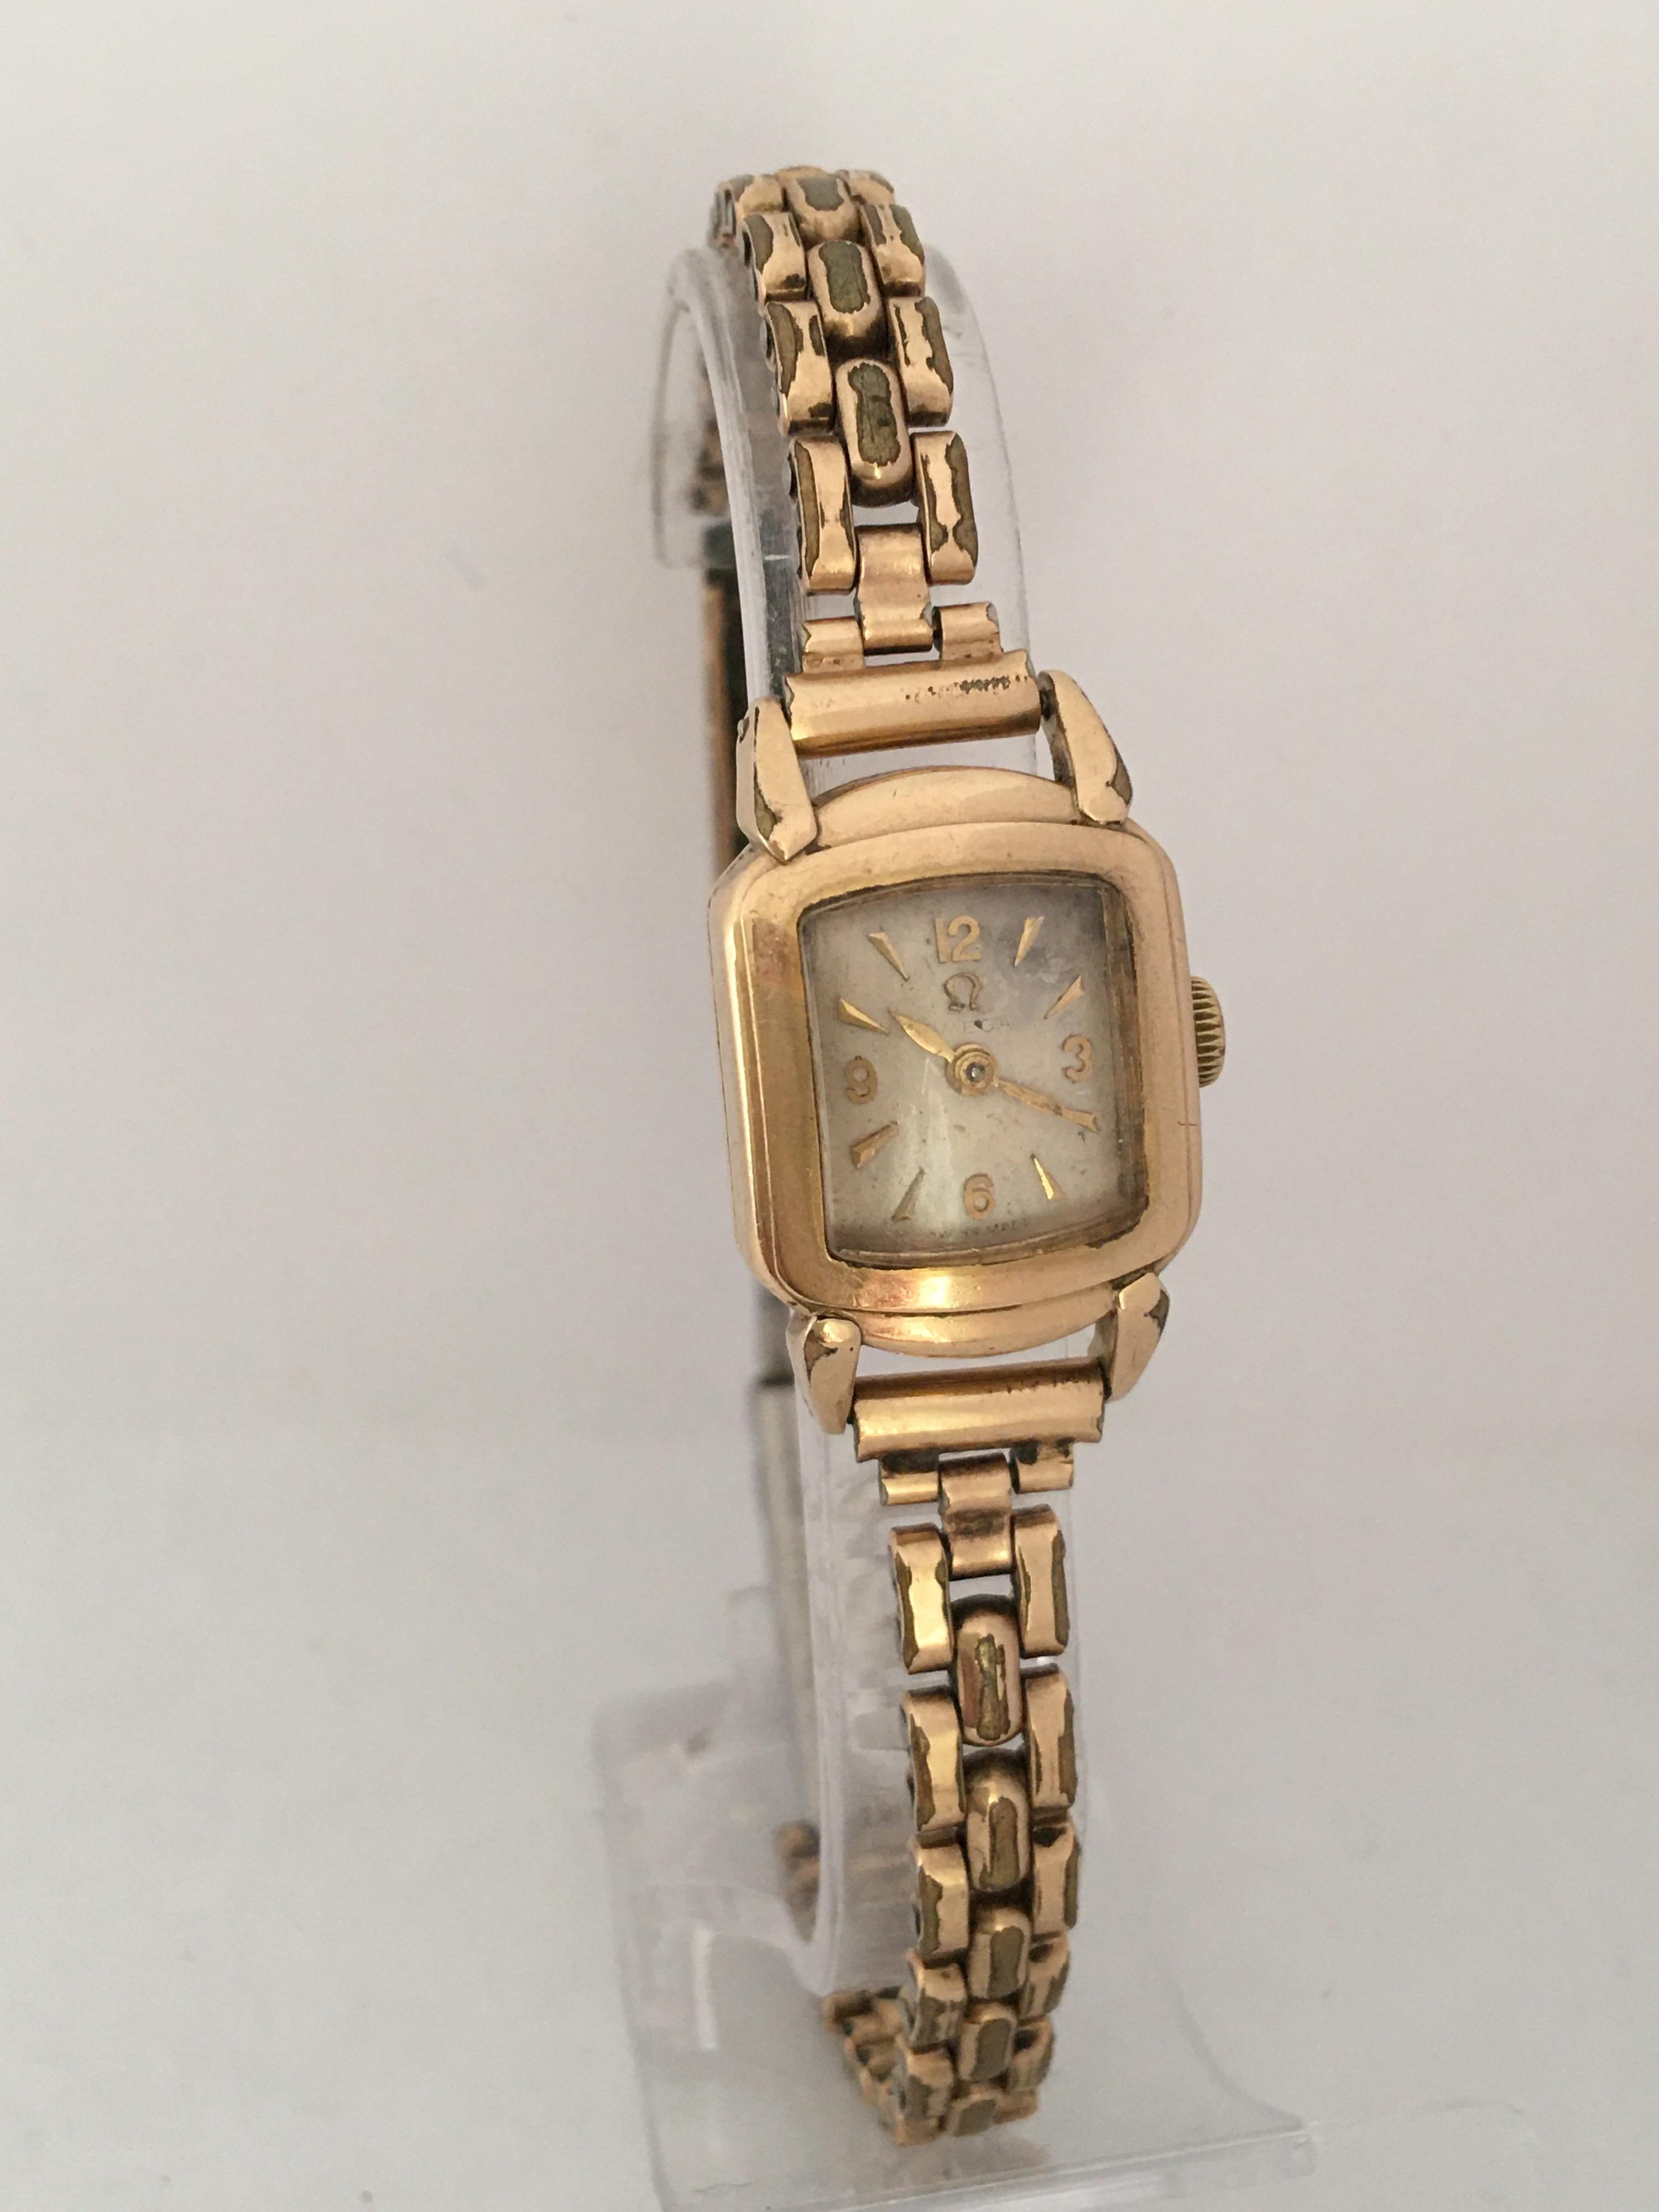 Ladies Omega Vintage Gold-Plated Mechanical Watch For Sale 7